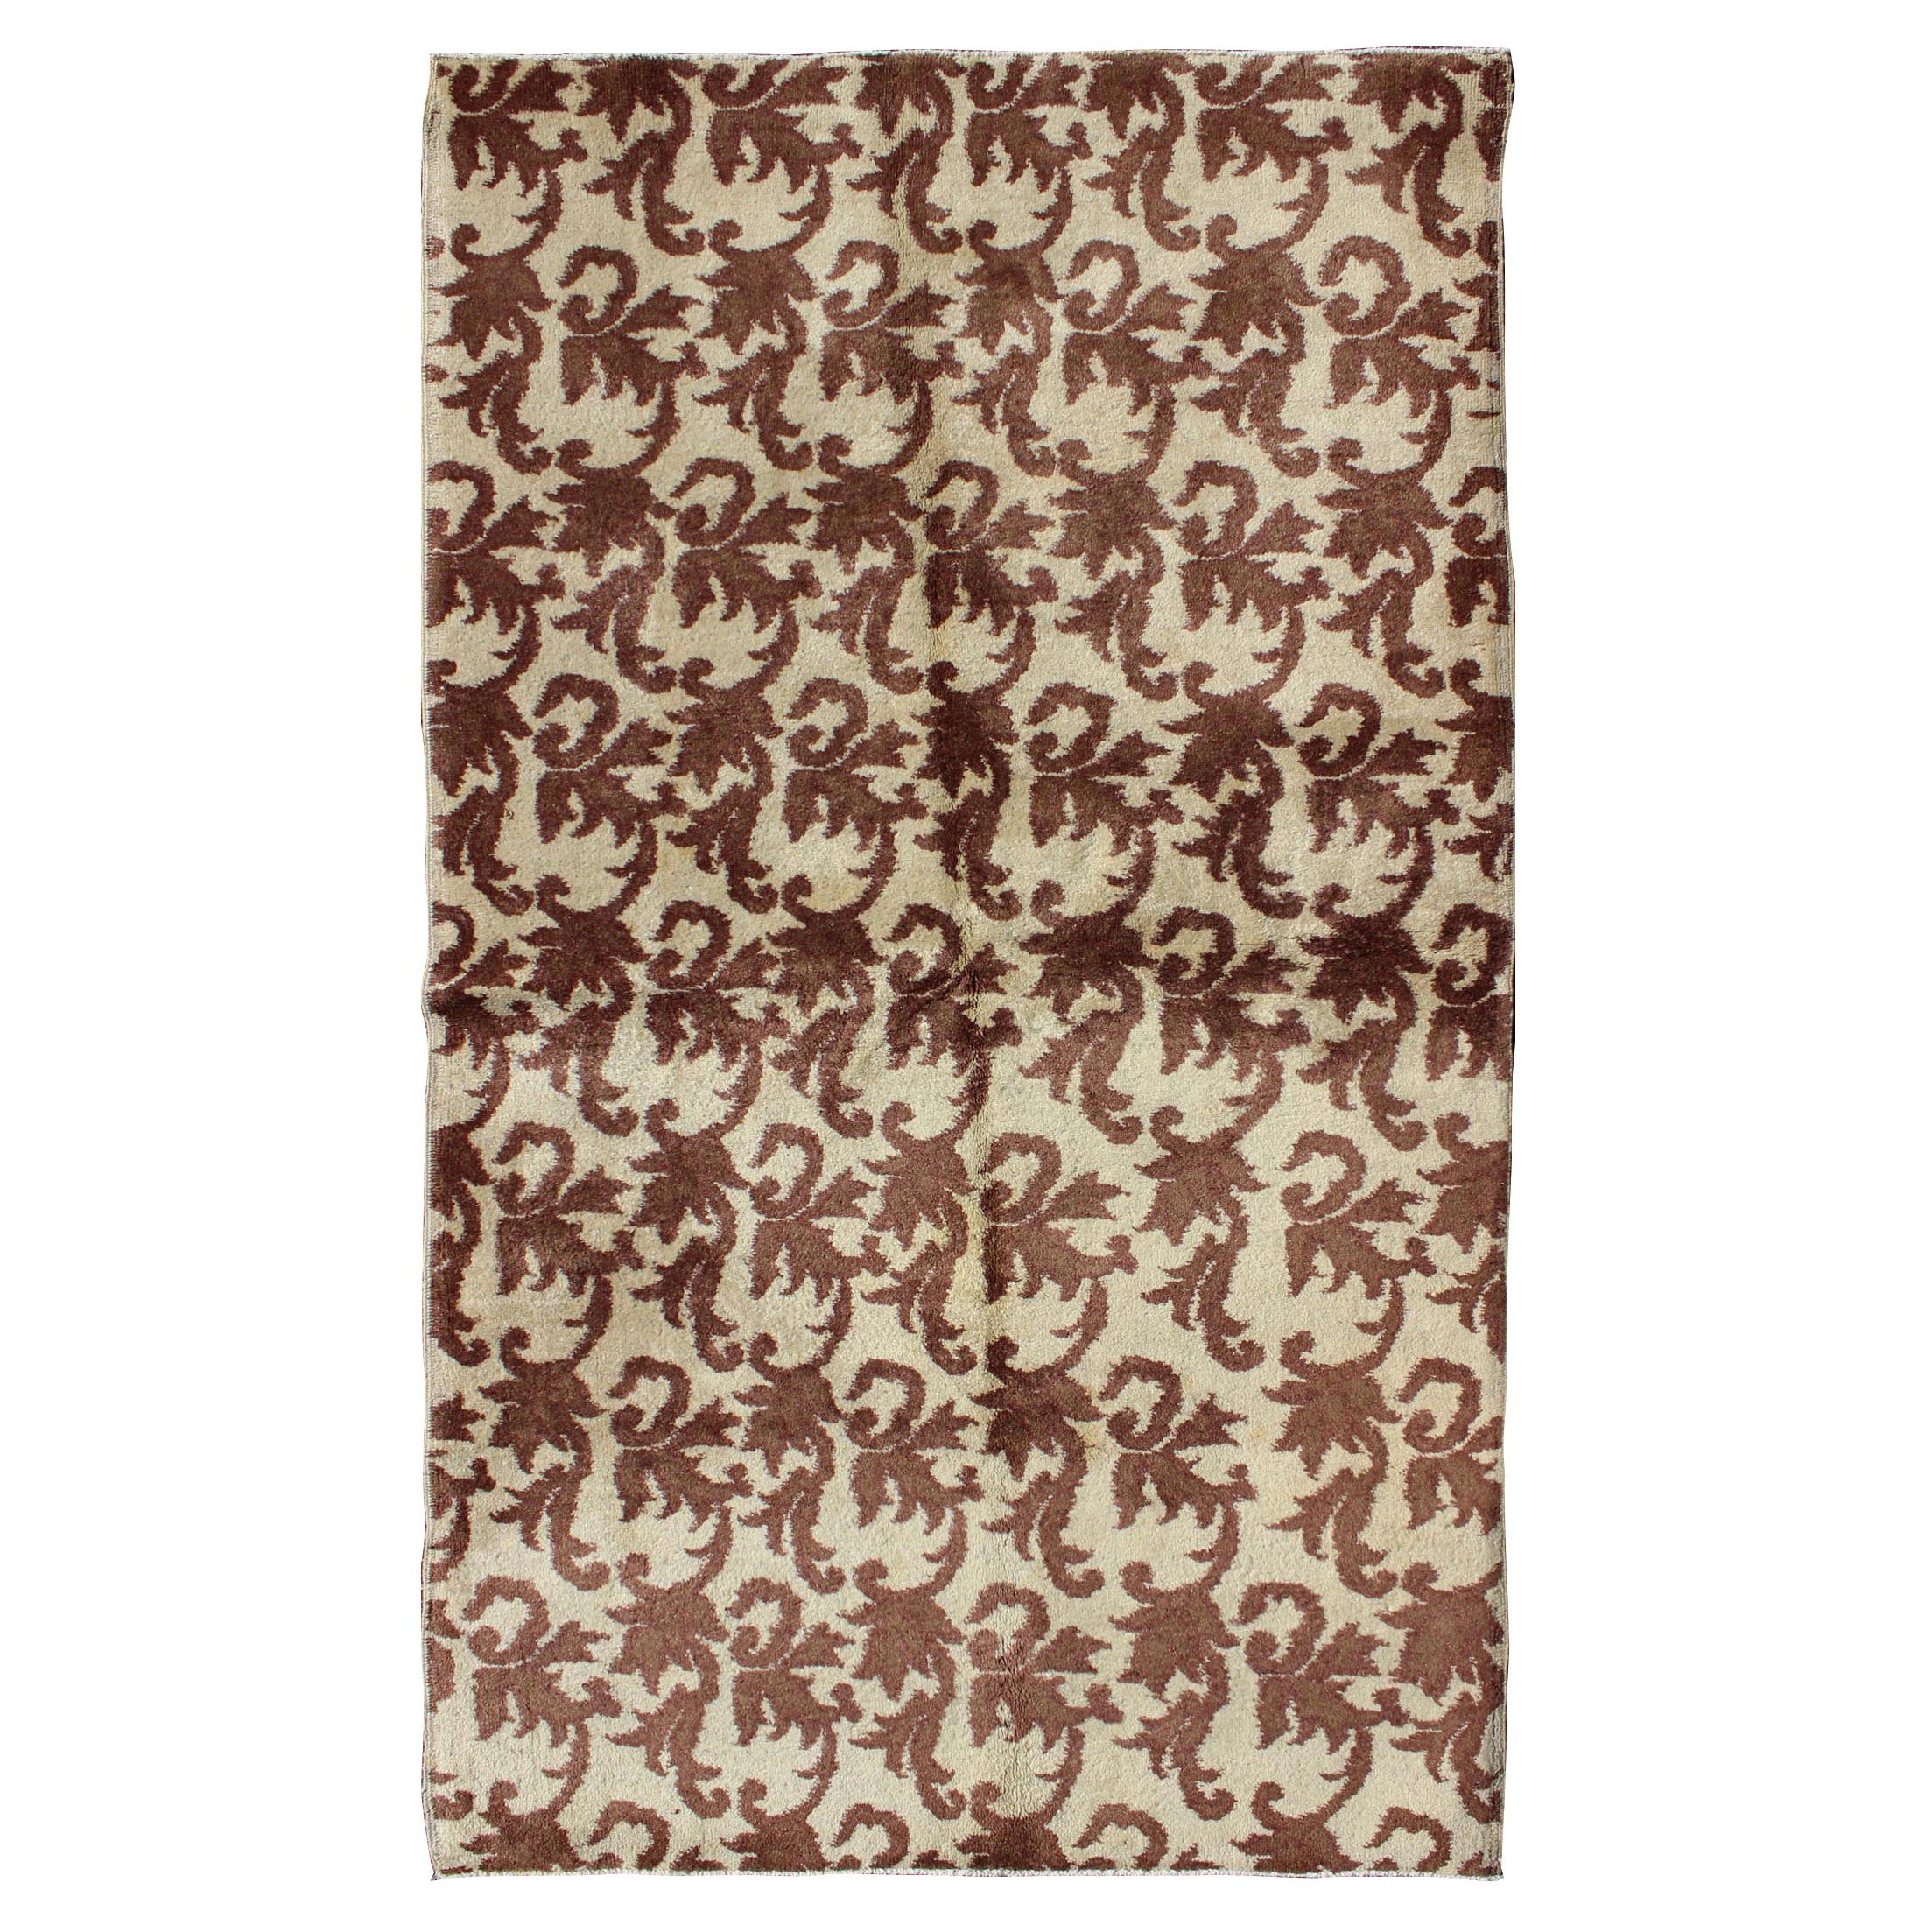 Art Deco Design Rug with a Modern Design in Chocolate Brown and Gray Taupe